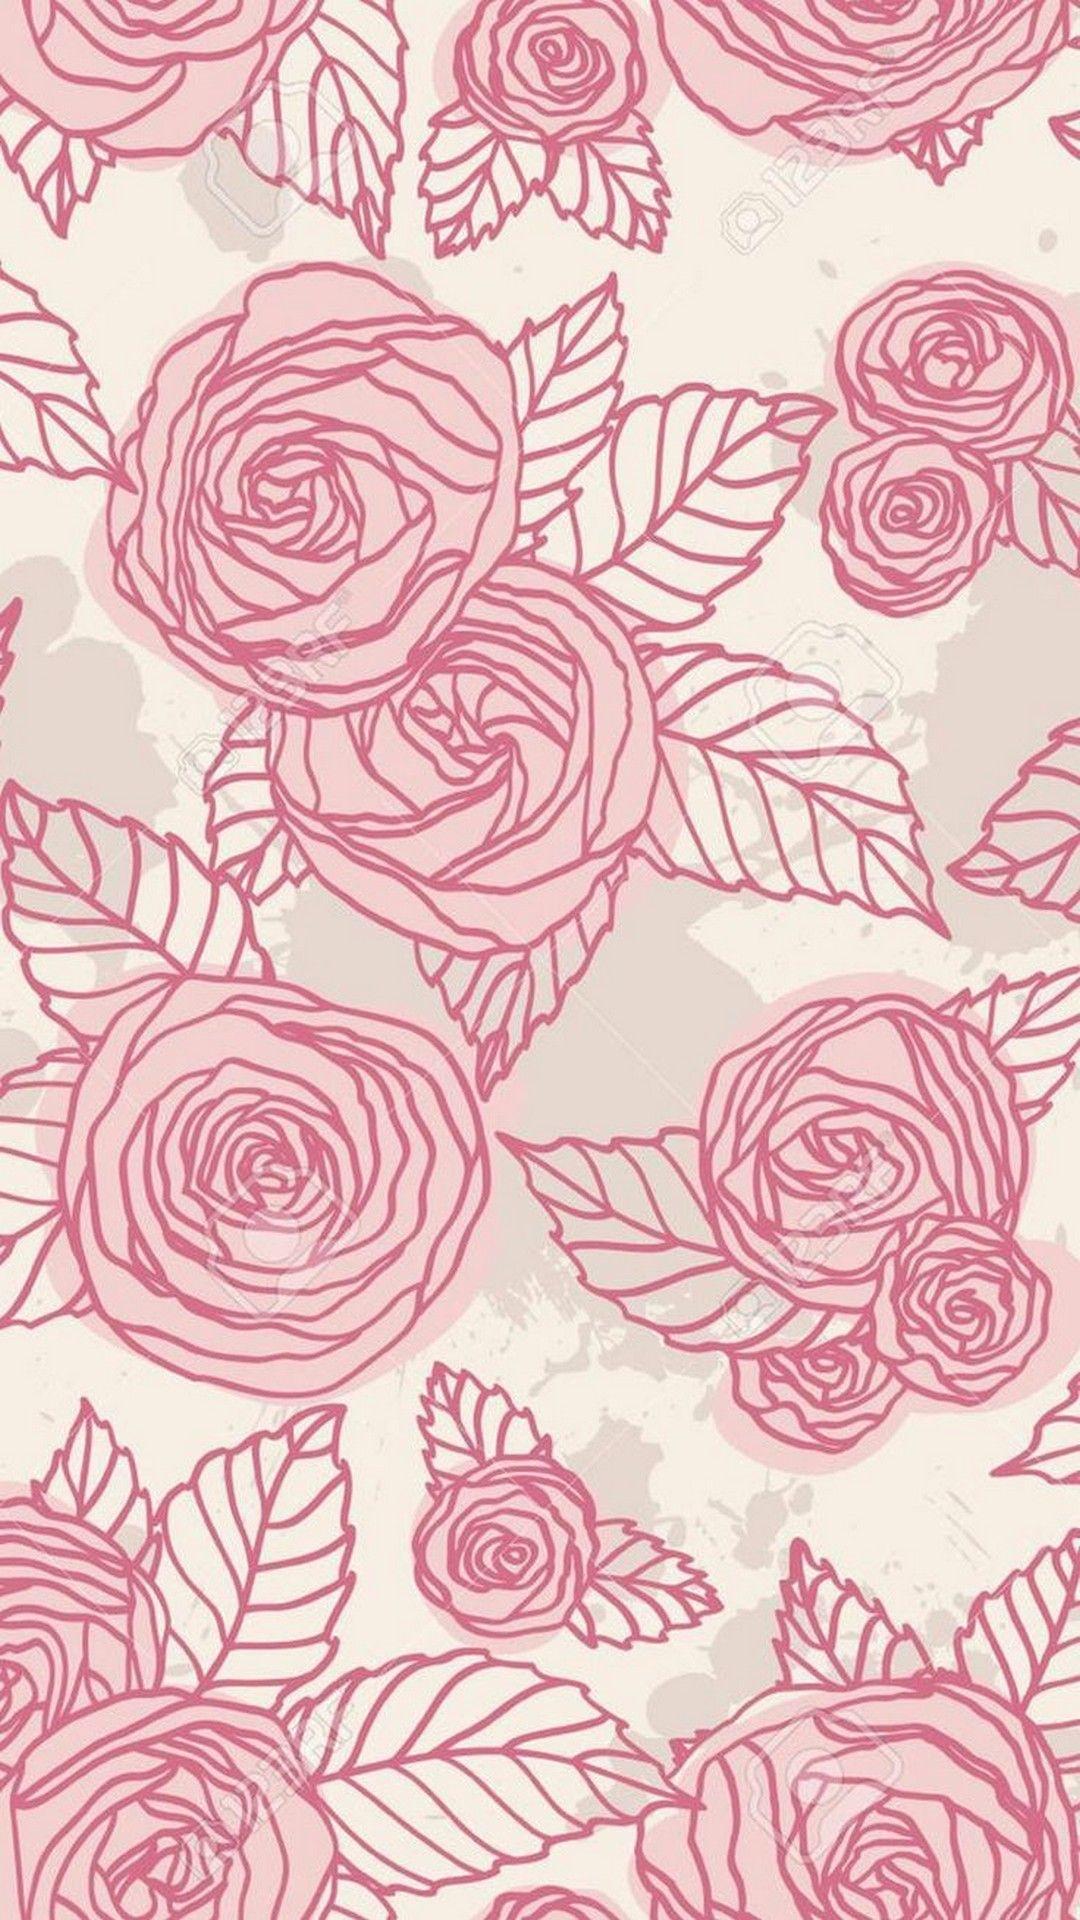 Rose Drawing Wallpapers Top Free Rose Drawing Backgrounds Wallpaperaccess